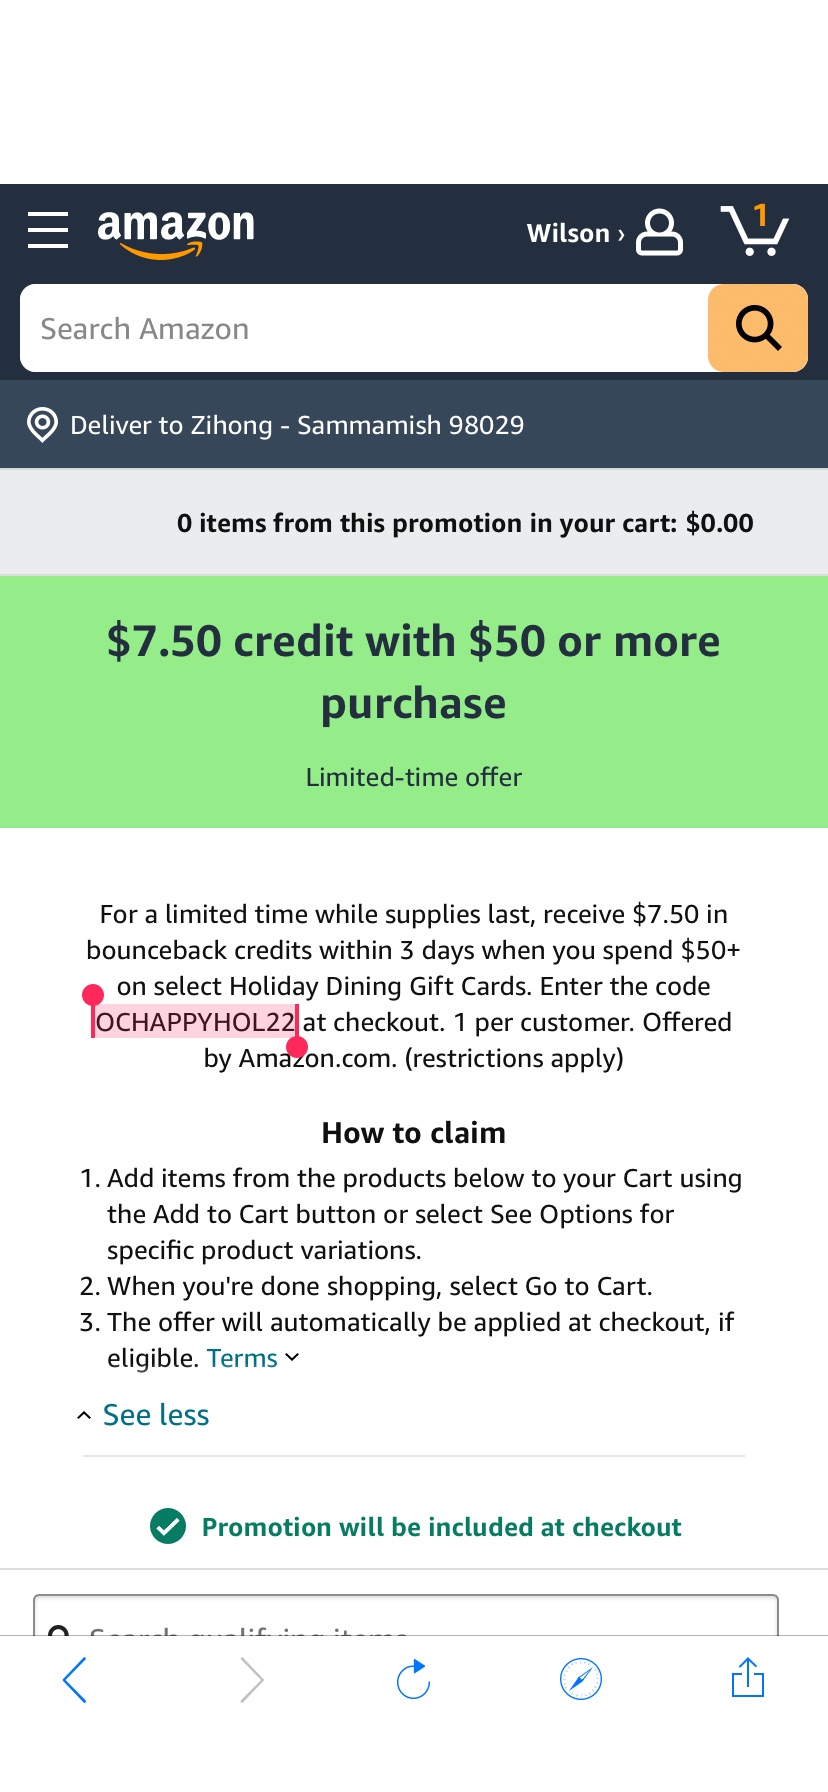 Amazon.com: $7.50 credit with $50 or more purchase promotion